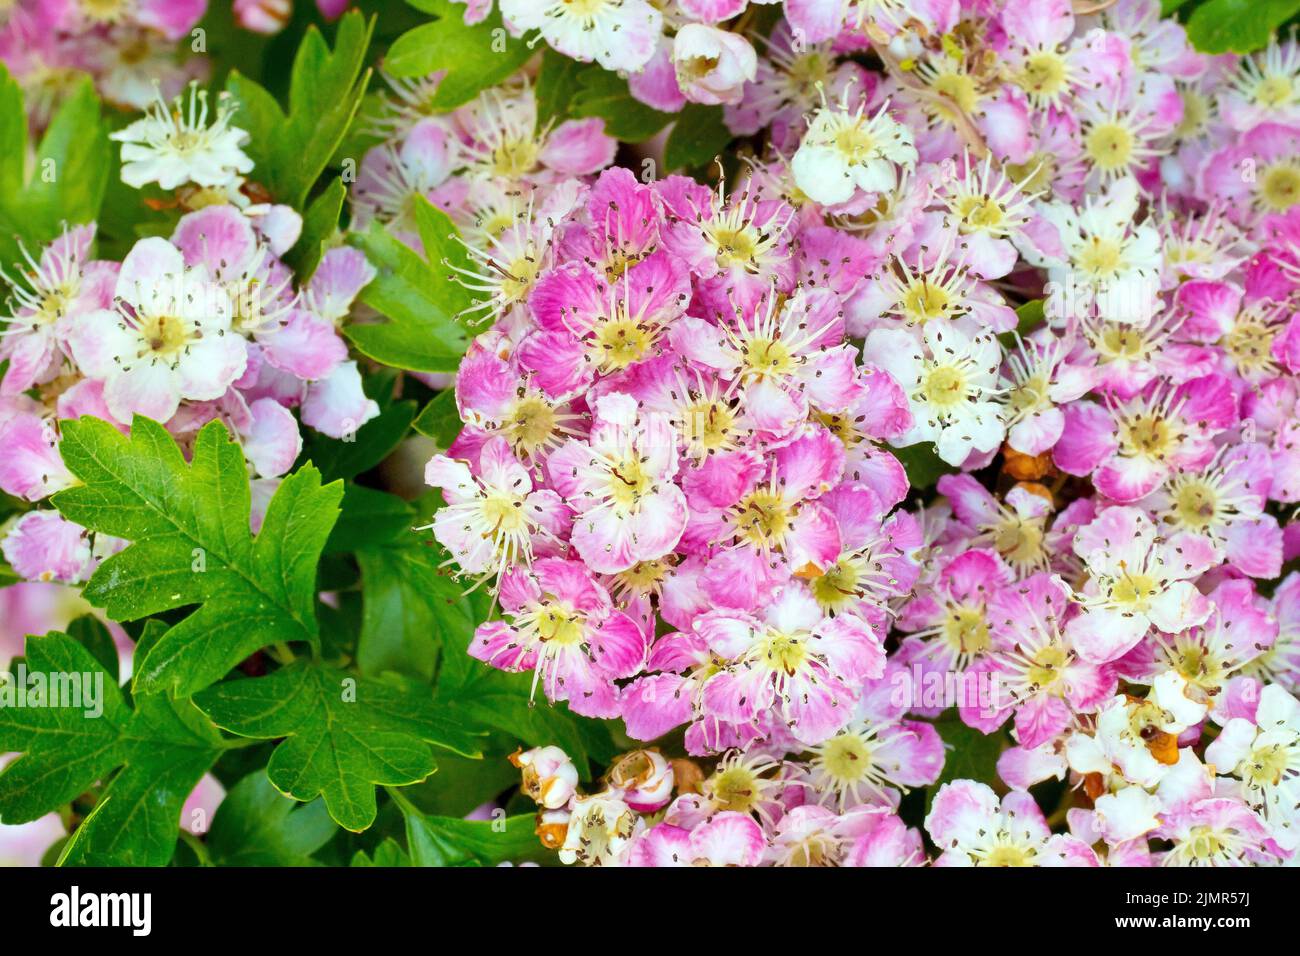 Hawthorn, Whitethorn or May Tree (crataegus monogyna), close up showing some strongly pink tinged flowers or blossom of the common tree. Stock Photo